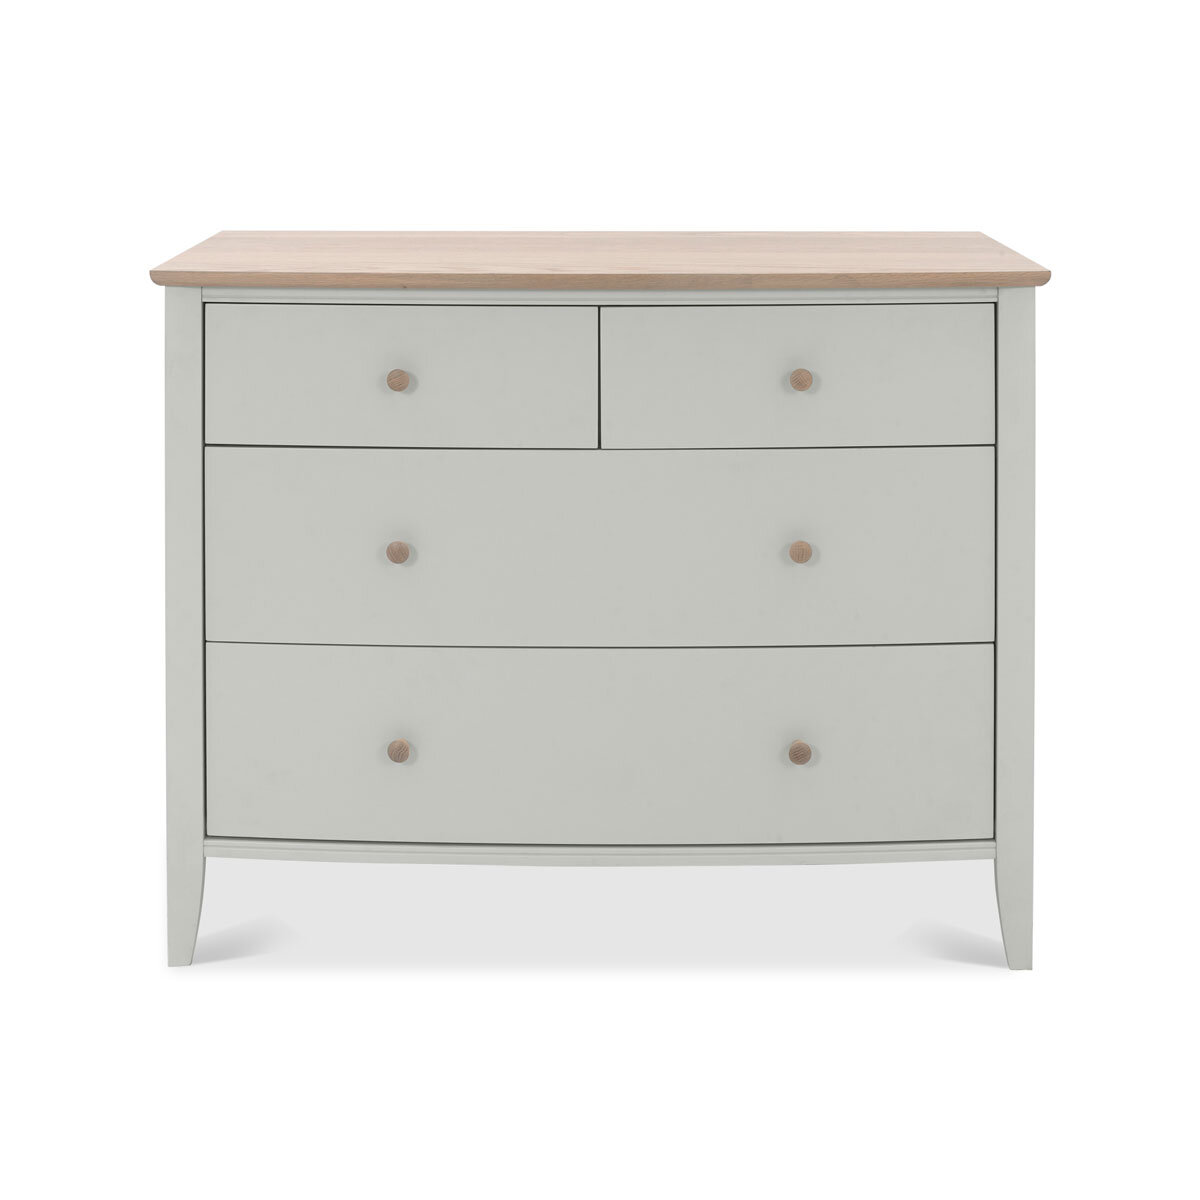 Bentley Designs Whitby Scandi Oak & Grey 2+2 Drawer Chest of Drawers, Front View